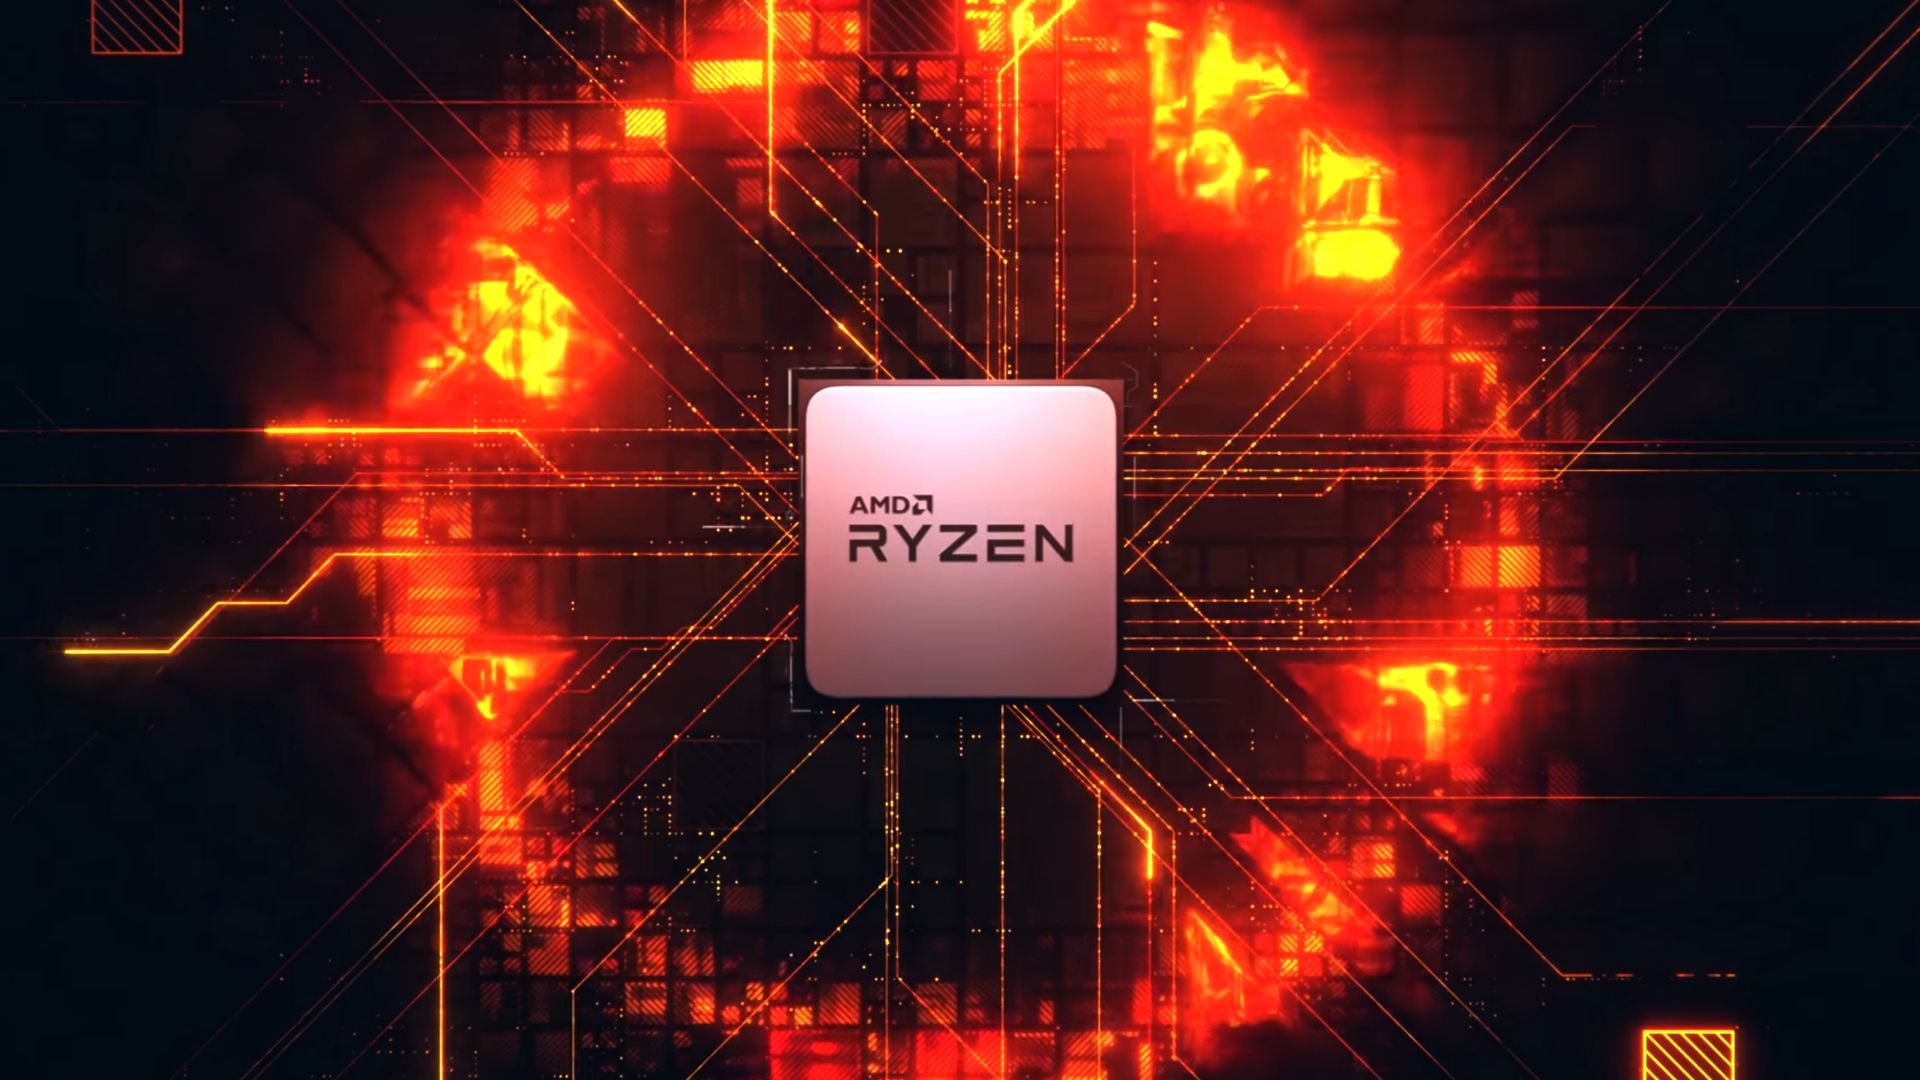 AMD Ryzen 5 2500X and Ryzen 3 2300X CPUs launch without coolers or price tags